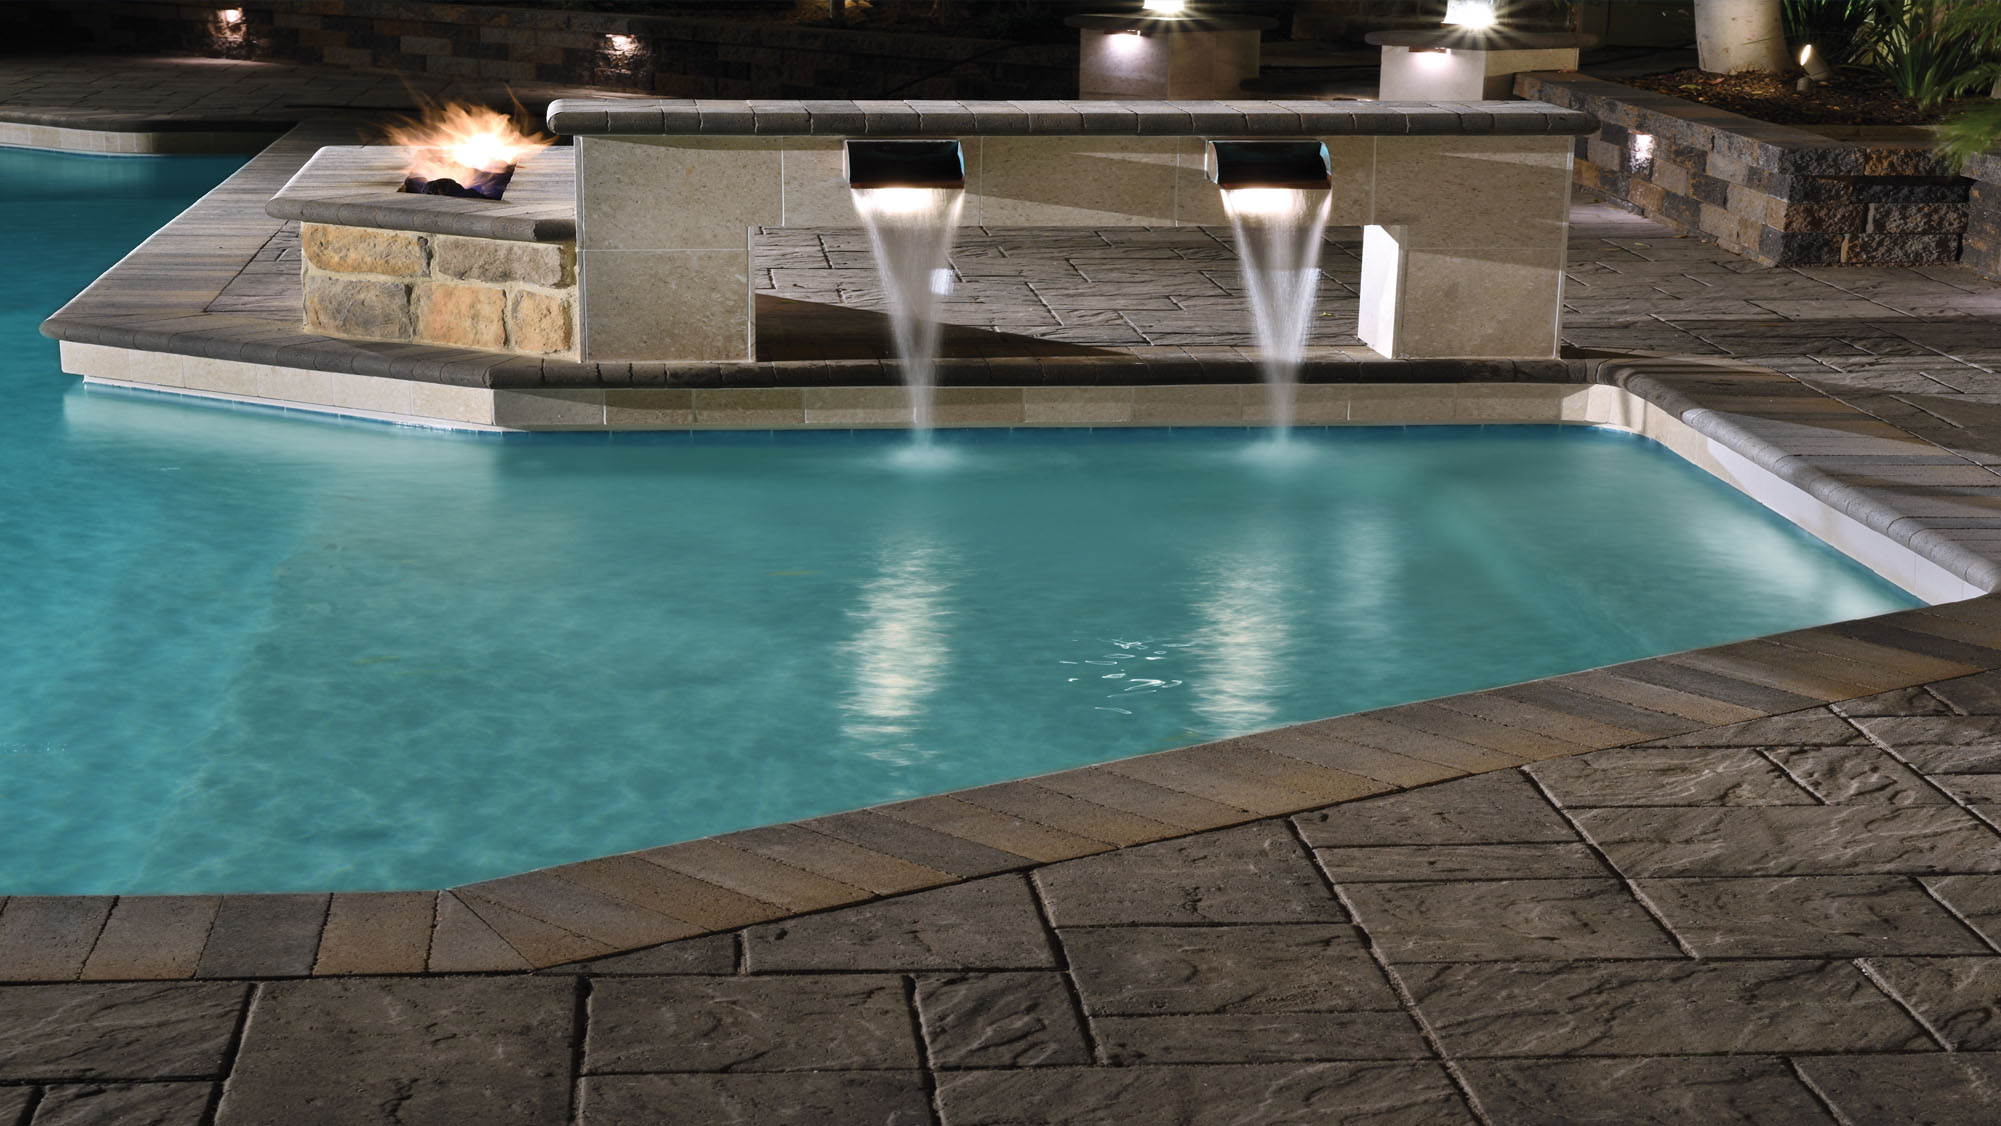 Pool surround Aztec Stone and Coping, Slate color